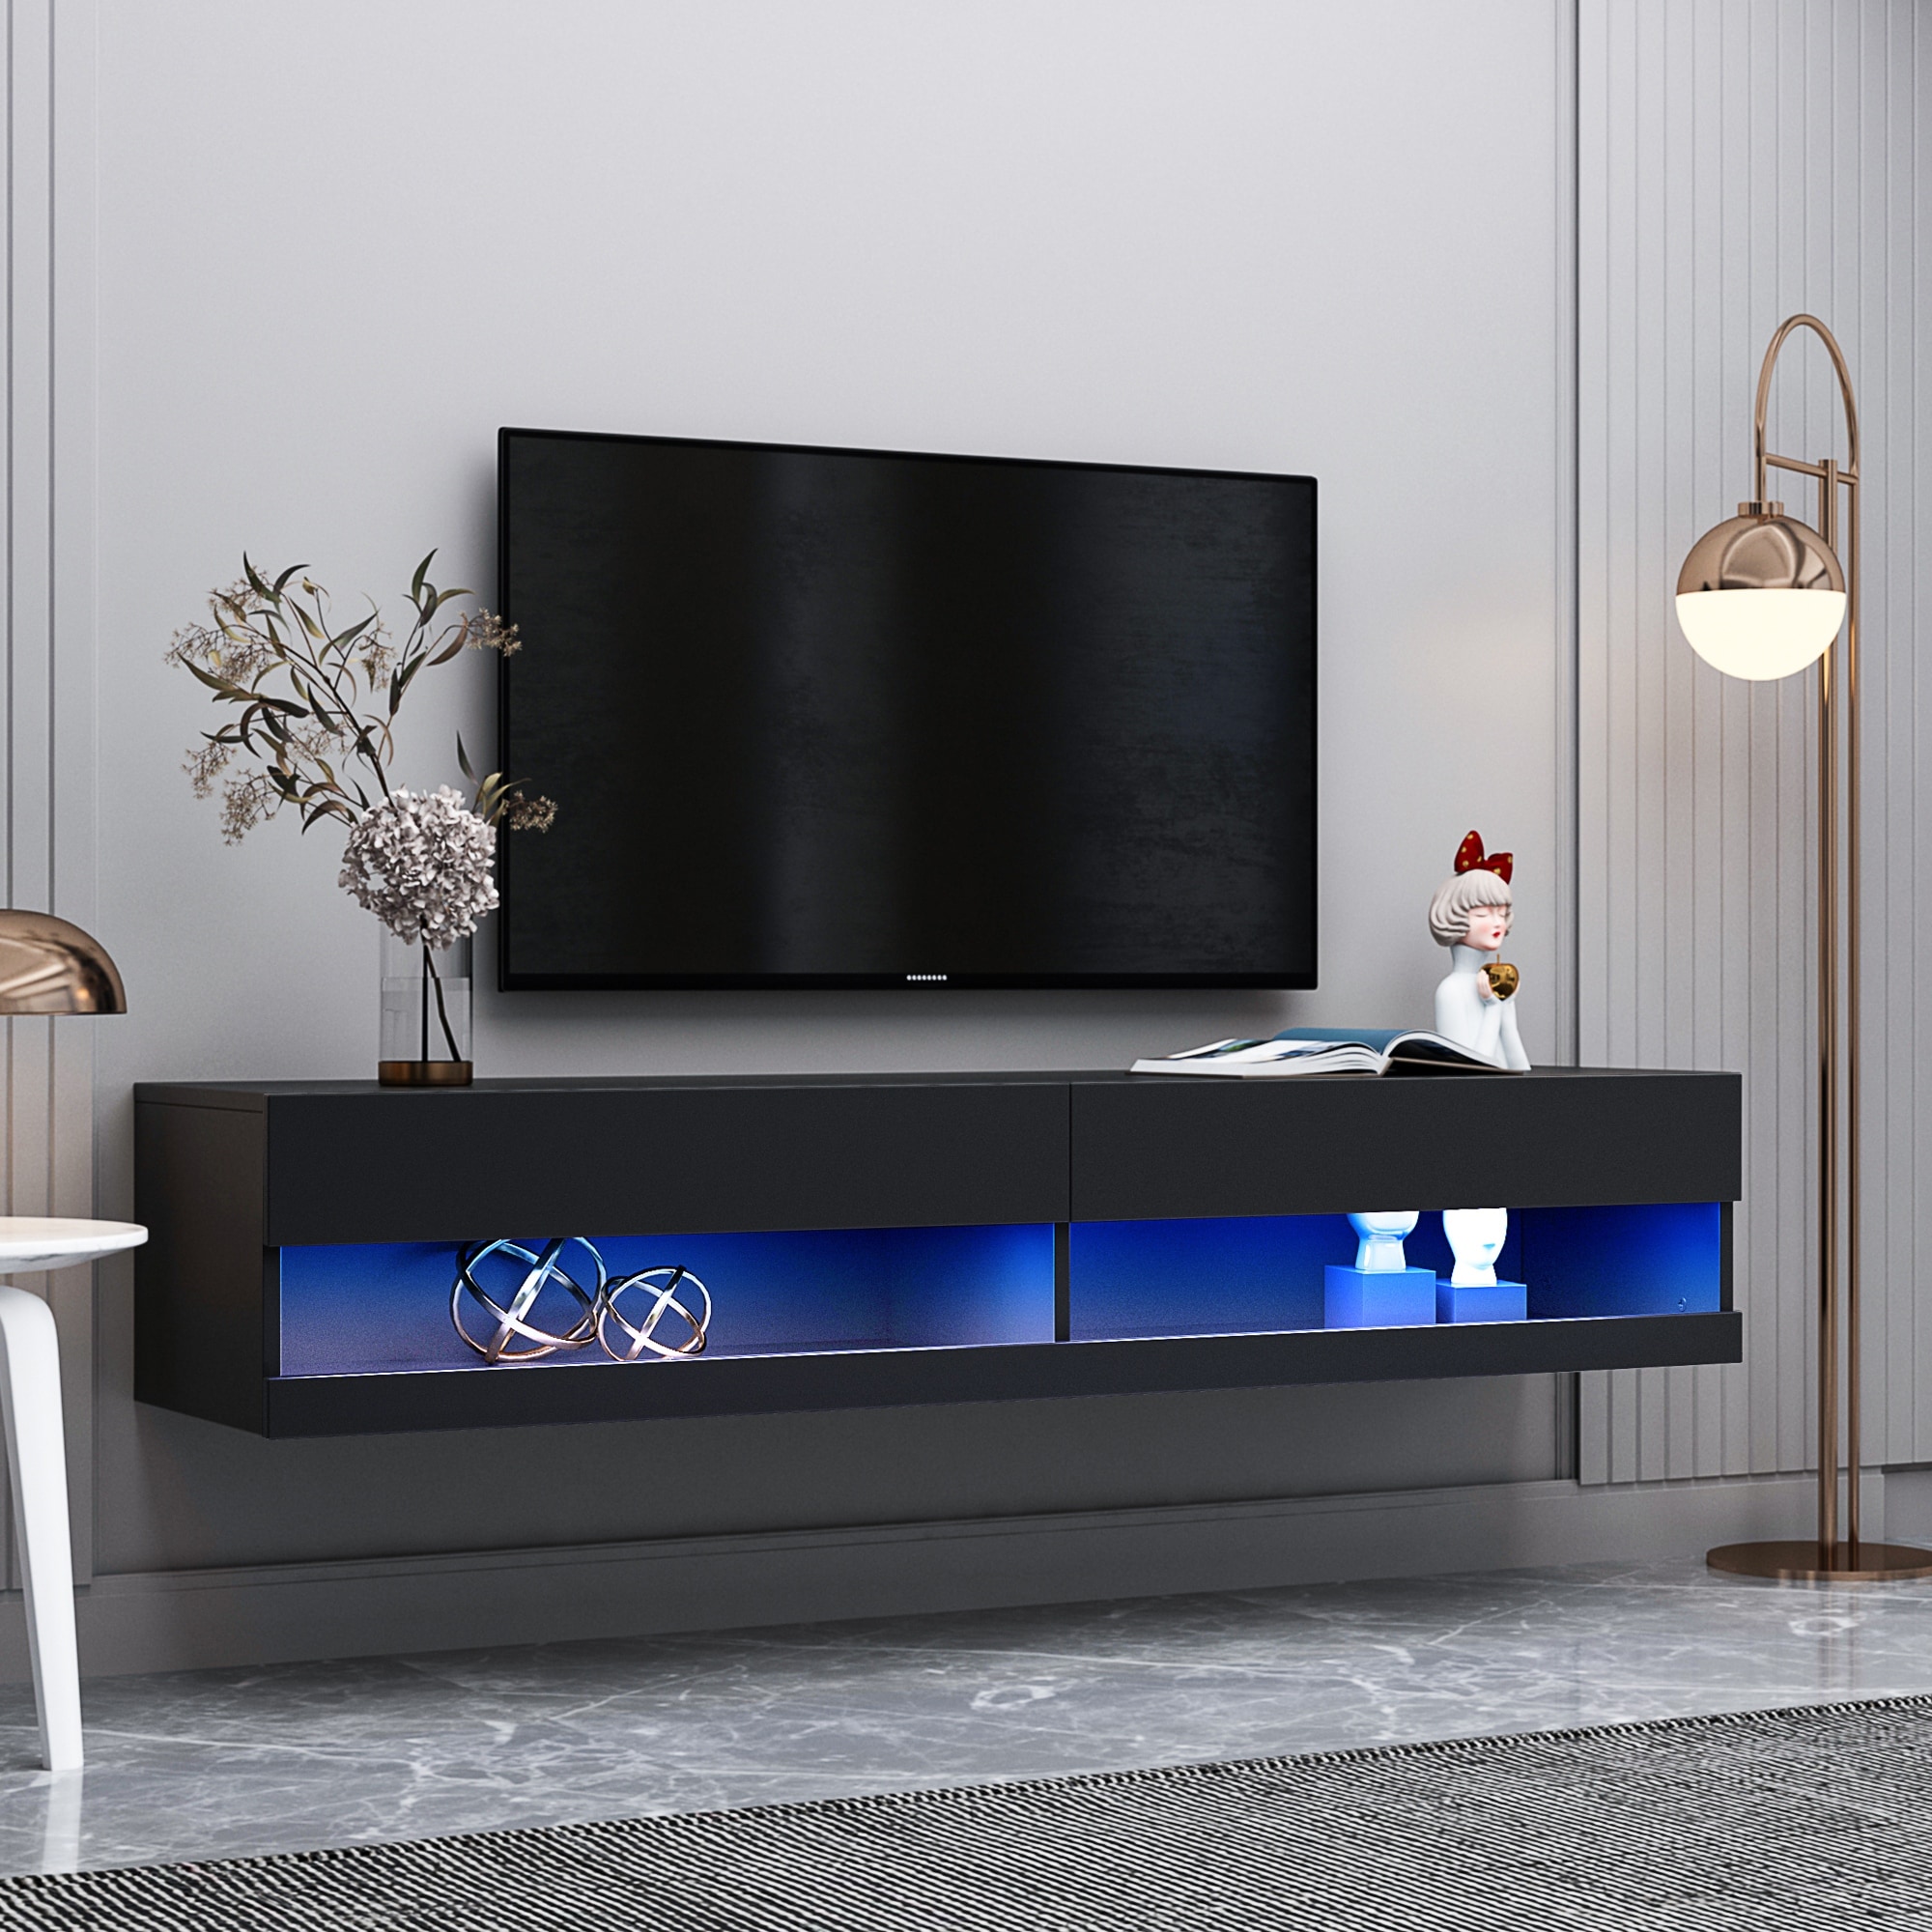 GREATPLANINC 80 inch Fireplace TV Stand TV Console with 20 Color LEDs for Living Room